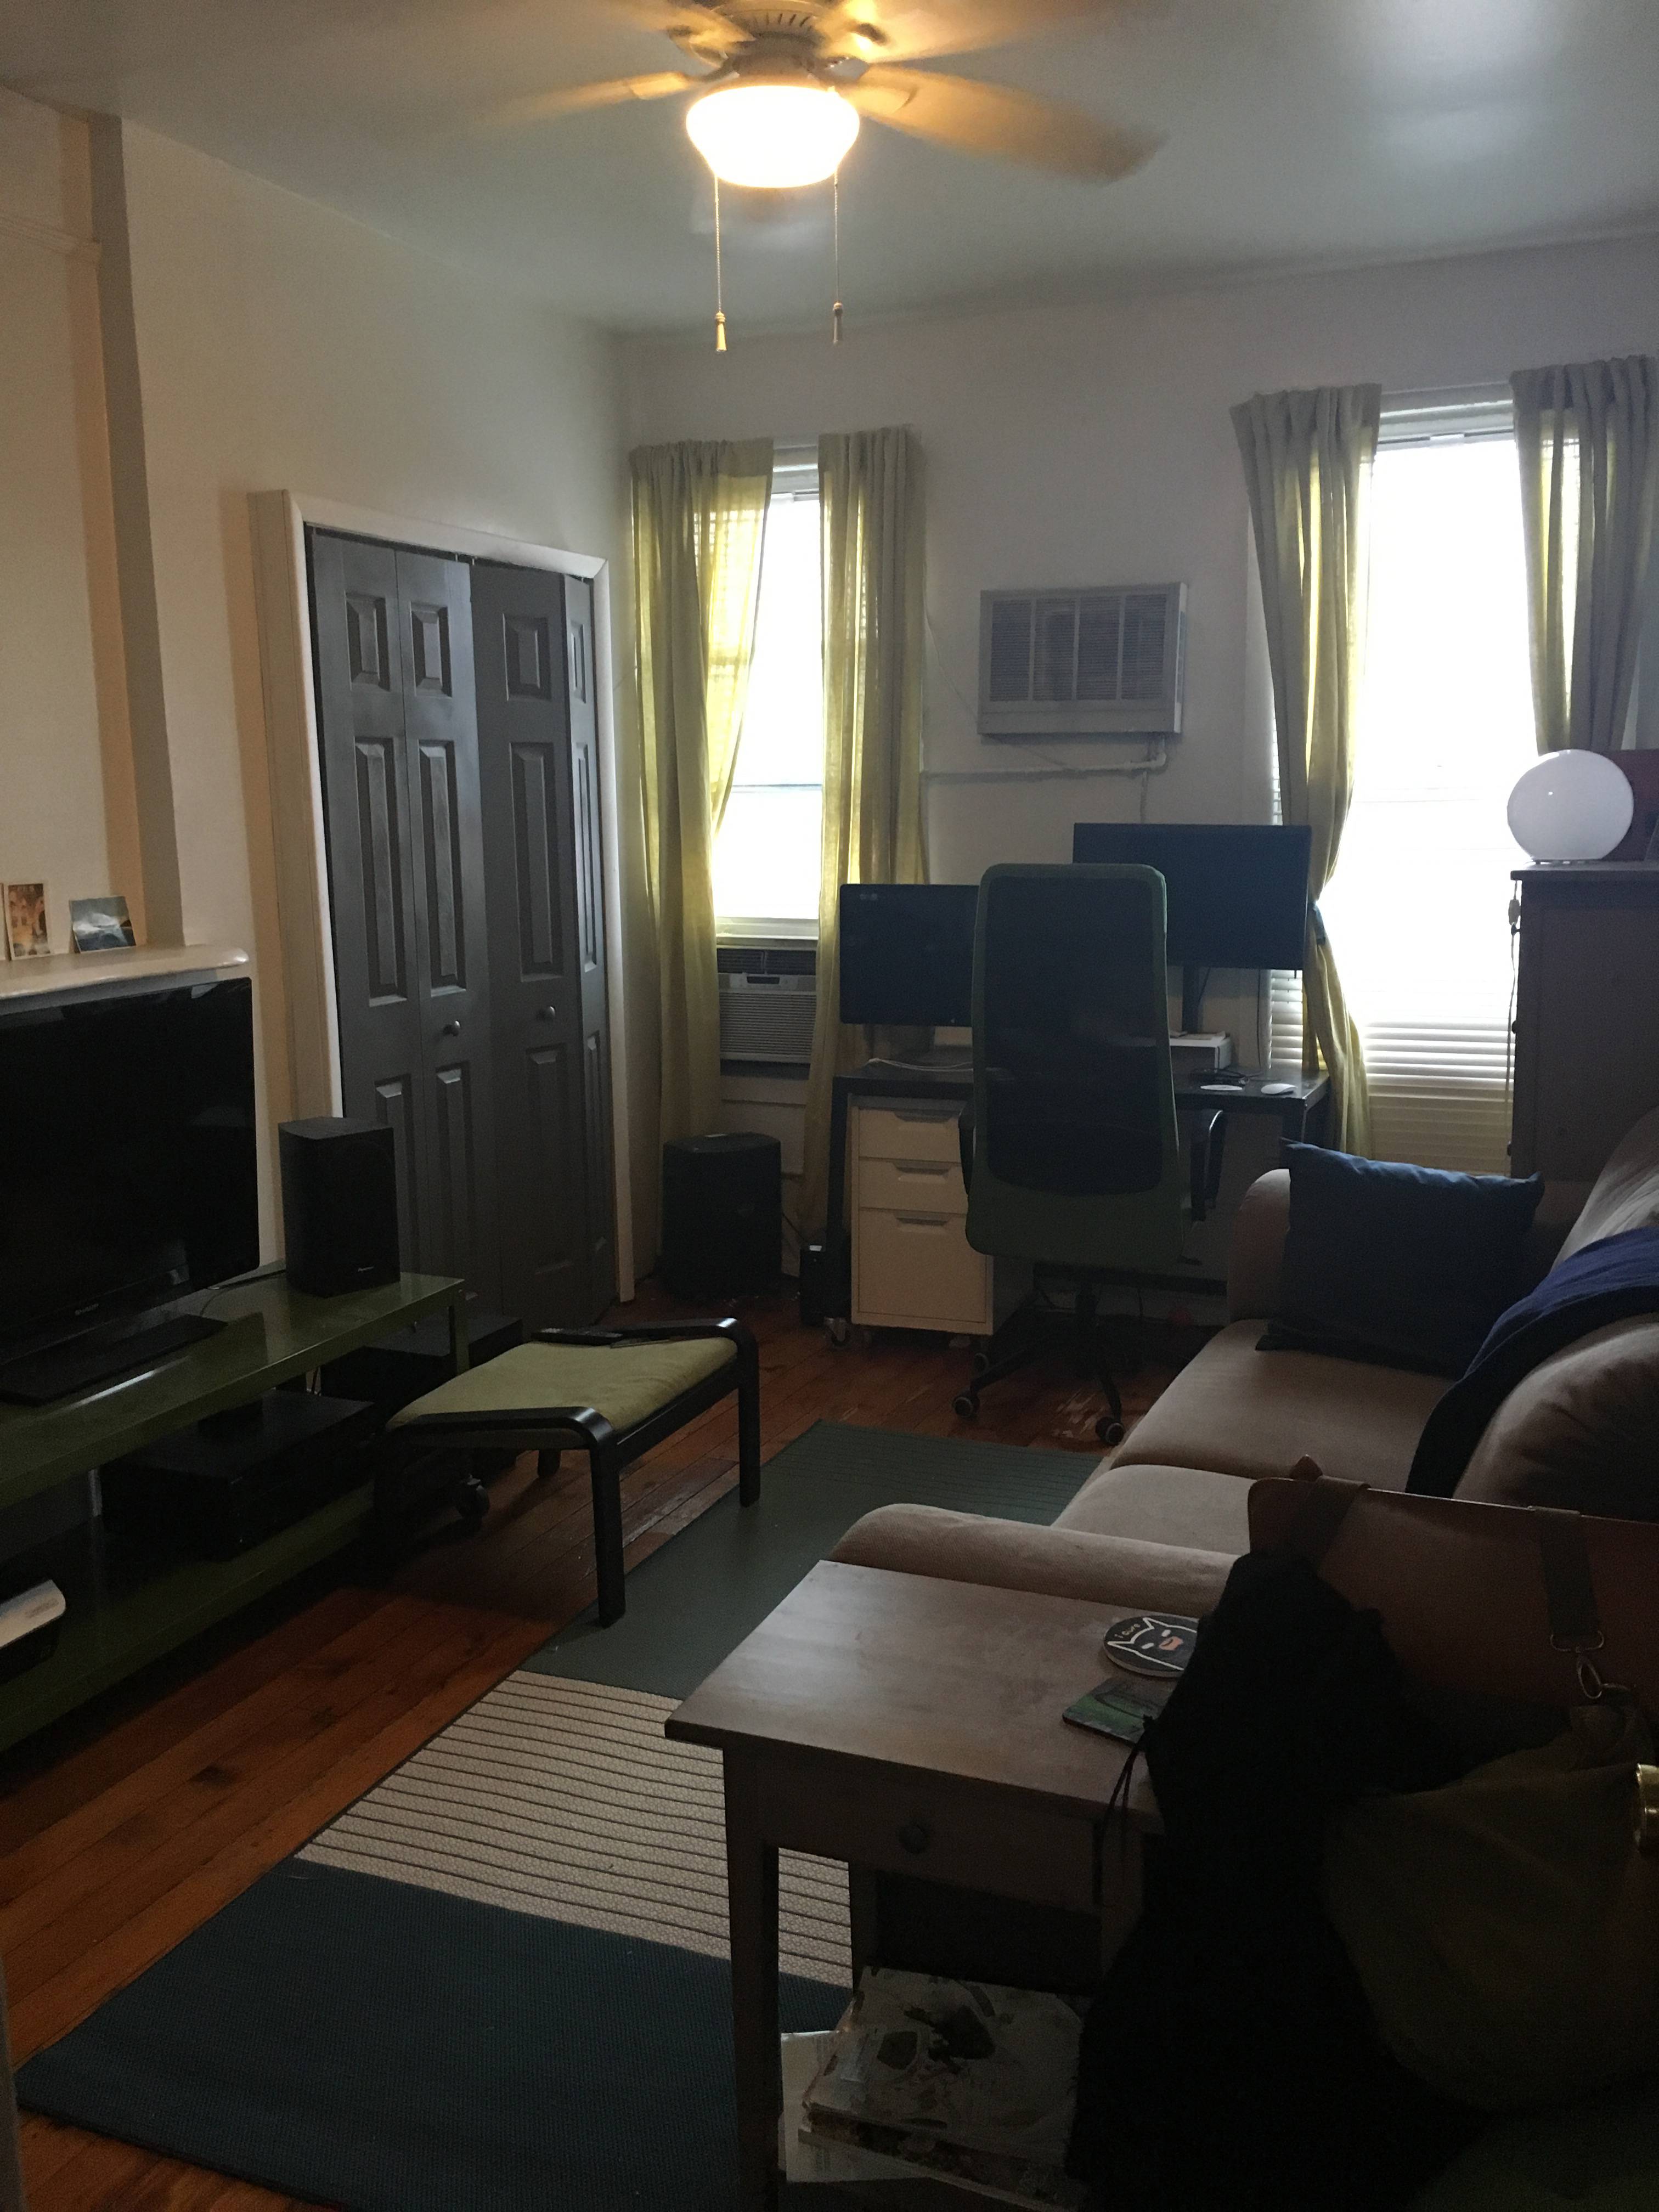 NORTHSIDE WILLIAMSBURG I LARGE OPEN CONVERTIBLE 2BR APARTMENT I A MUST SEE!!!